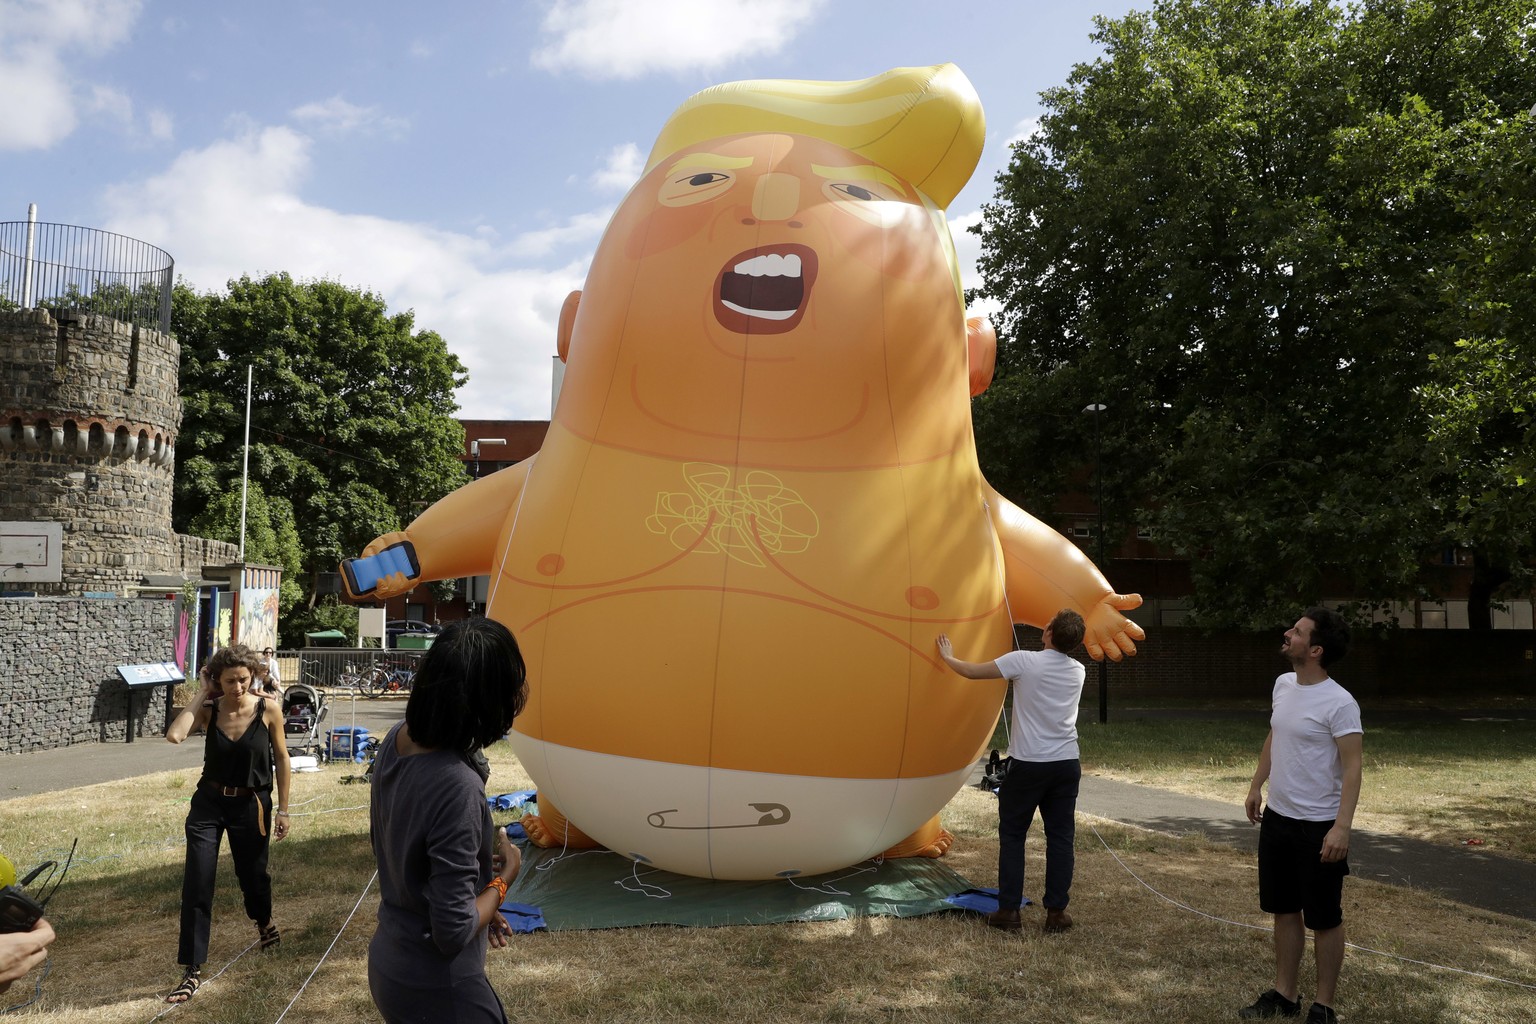 FILE - In this file photo taken Tuesday, July 10, 2018, a six-meter high cartoon baby blimp depicting U.S. President Donald Trump in north London. The President Trump blimp will become part of the Mus ...